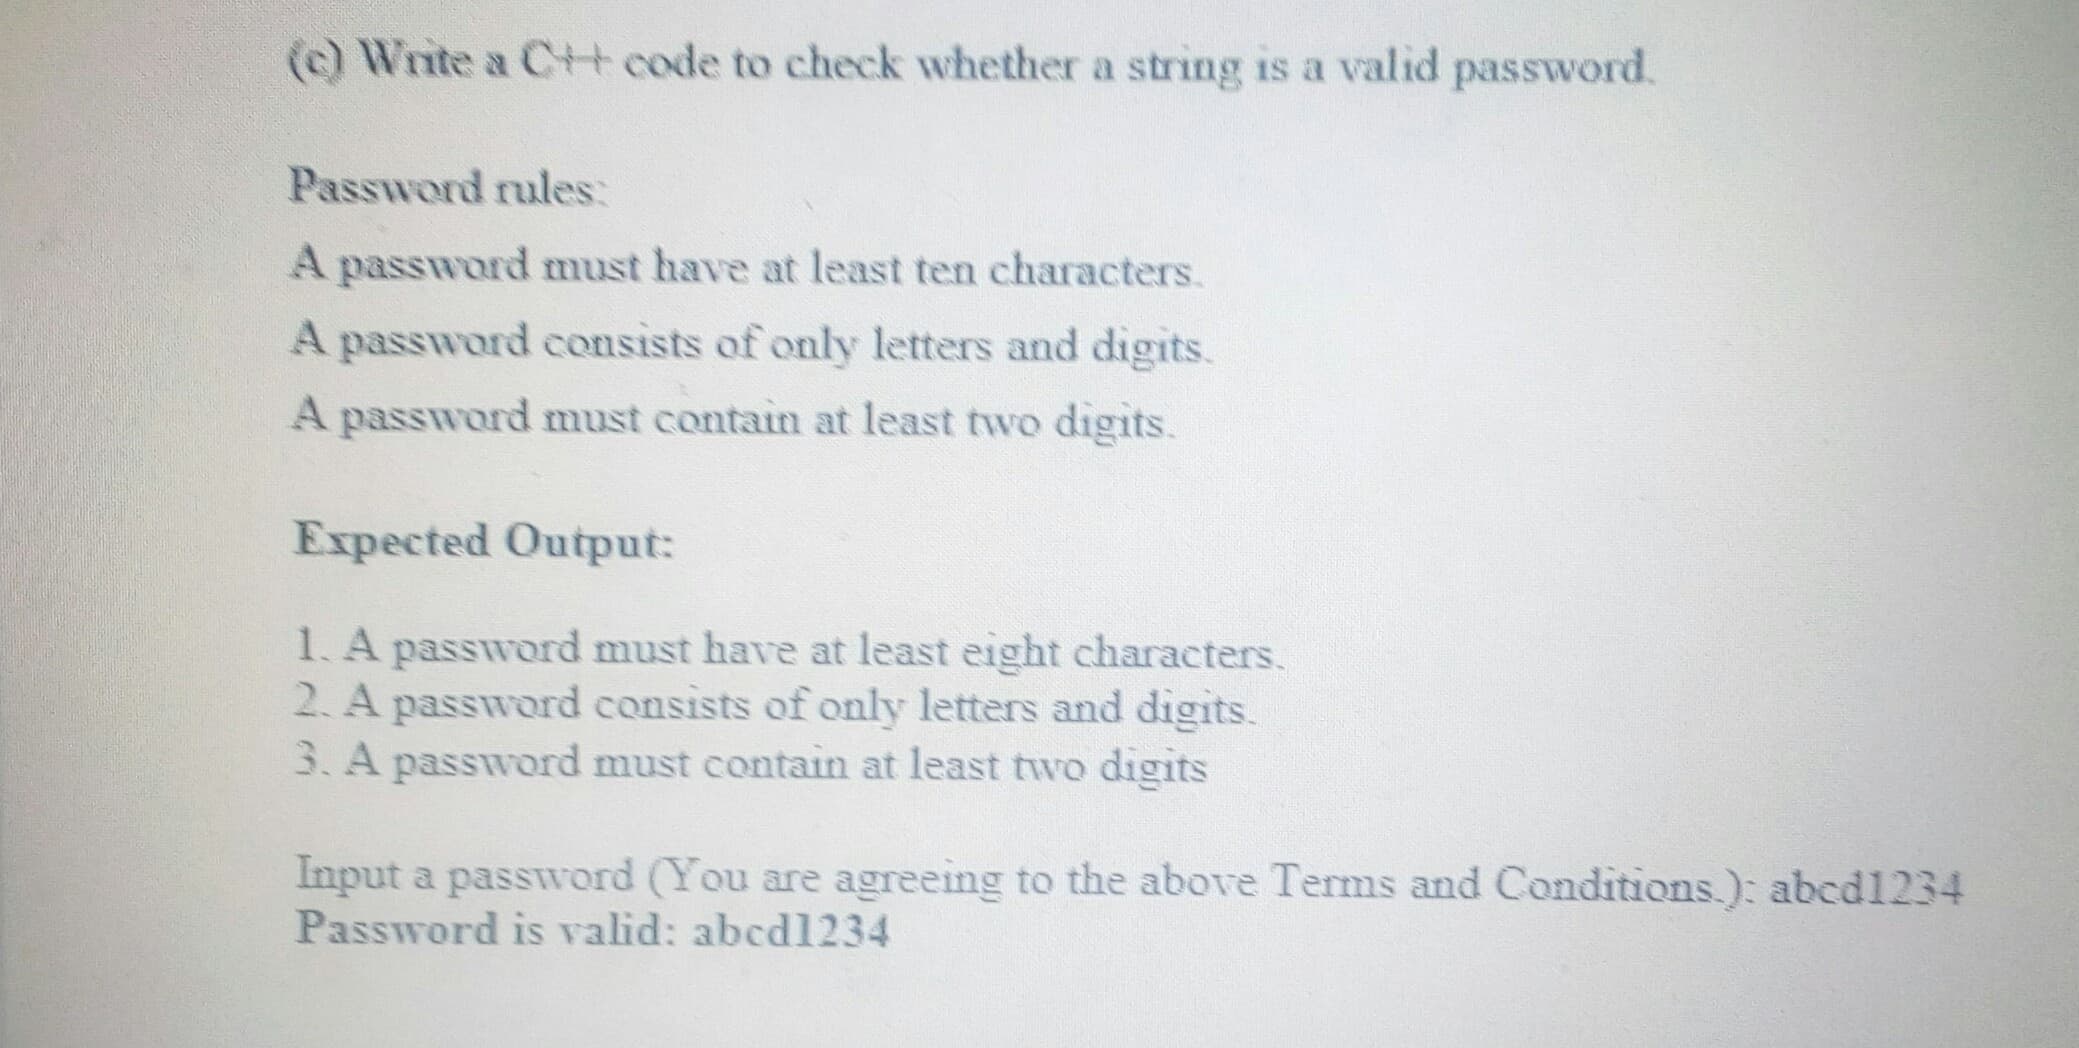 (c) Write a C+t code to check whether a string is a valid password.
Password rules:
A password must have at least ten characters.
A password consists of only letters and digits.
A password must contain at least two digits.
Expected Output:
1. A password must have at least eight characters.
2. A password consists of only letters and digits.
3. A password must contain at least two digits
